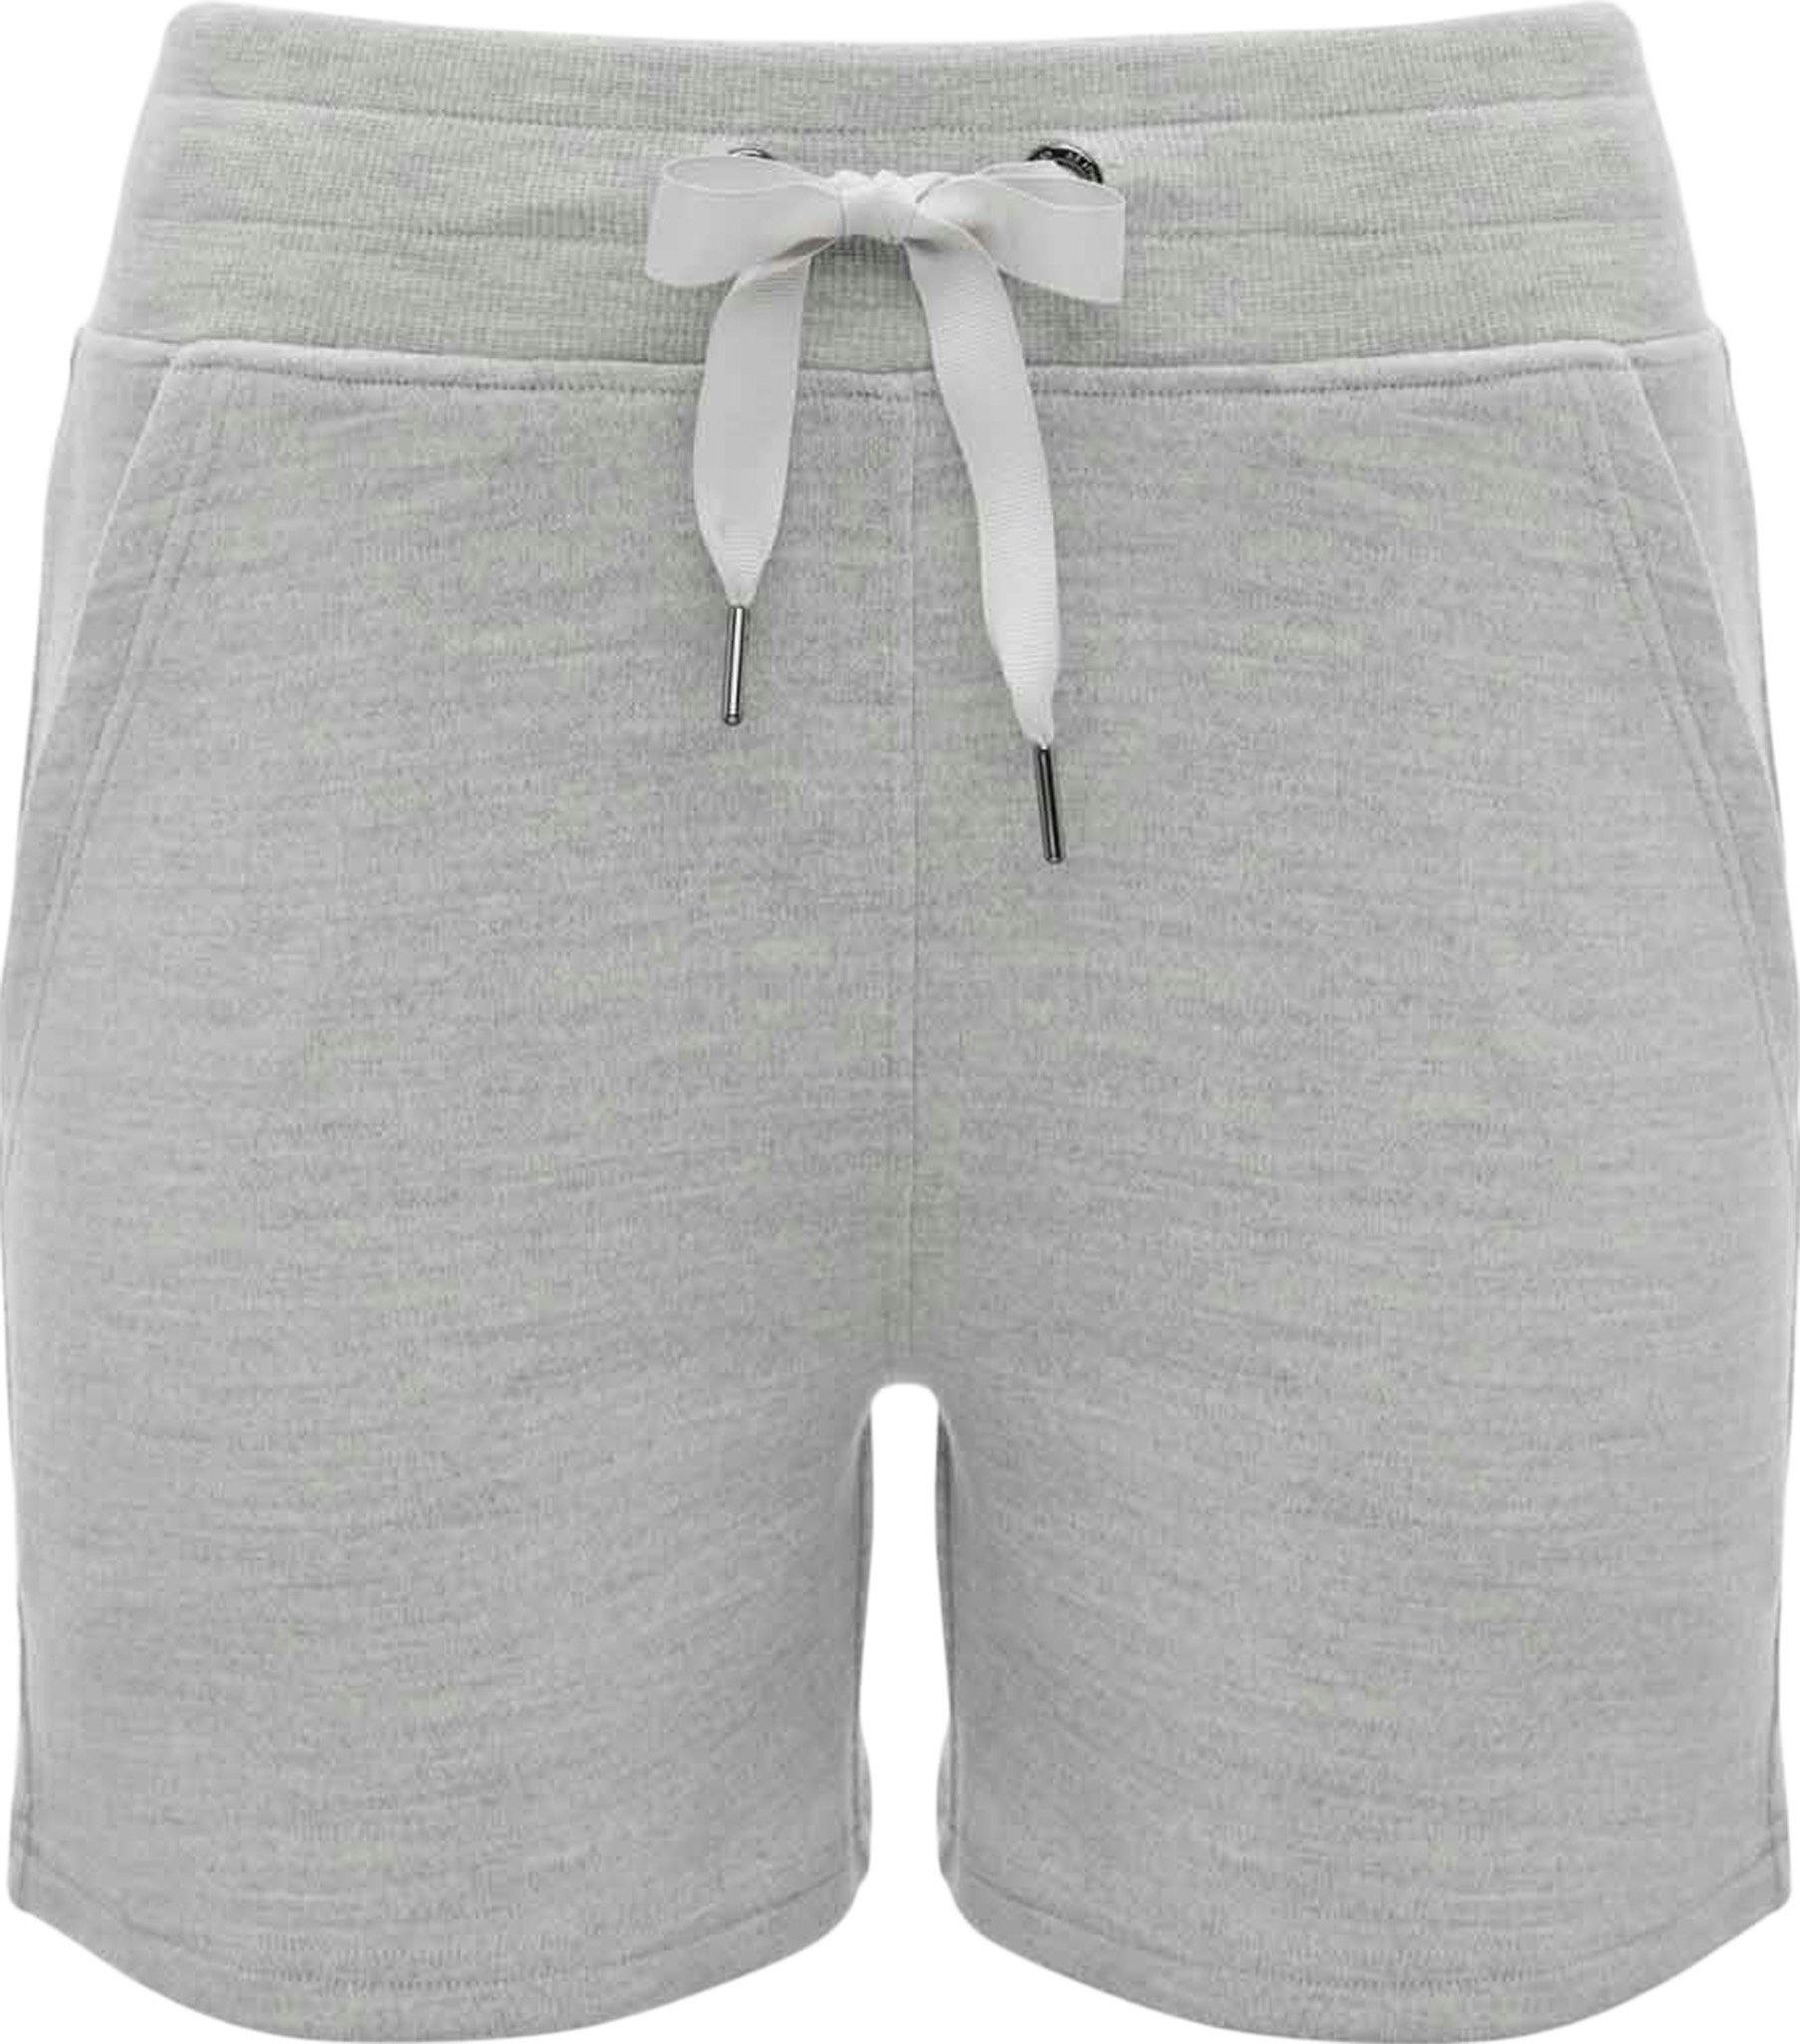 Product image for Tind Shorts - Women's